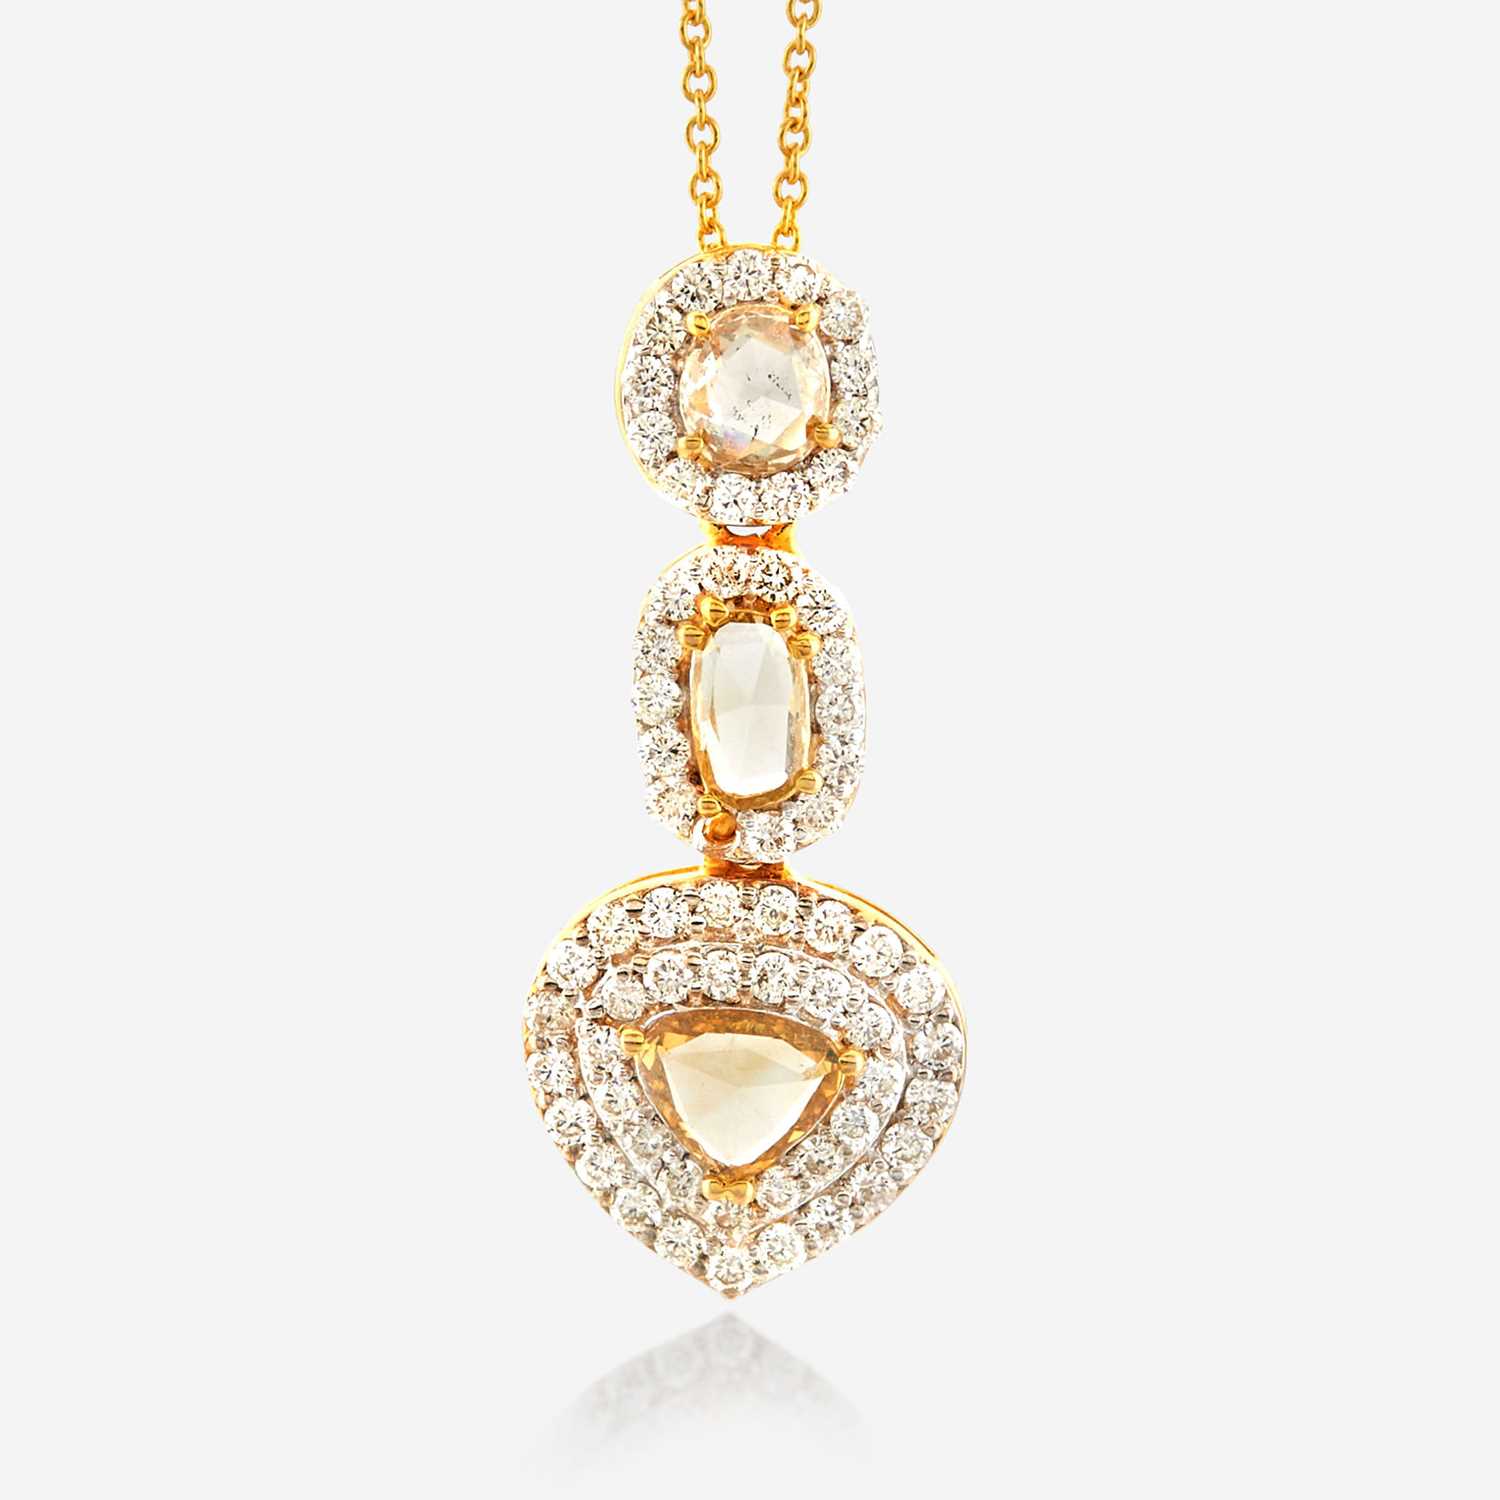 Lot 16 - A diamond and gold pendant necklace